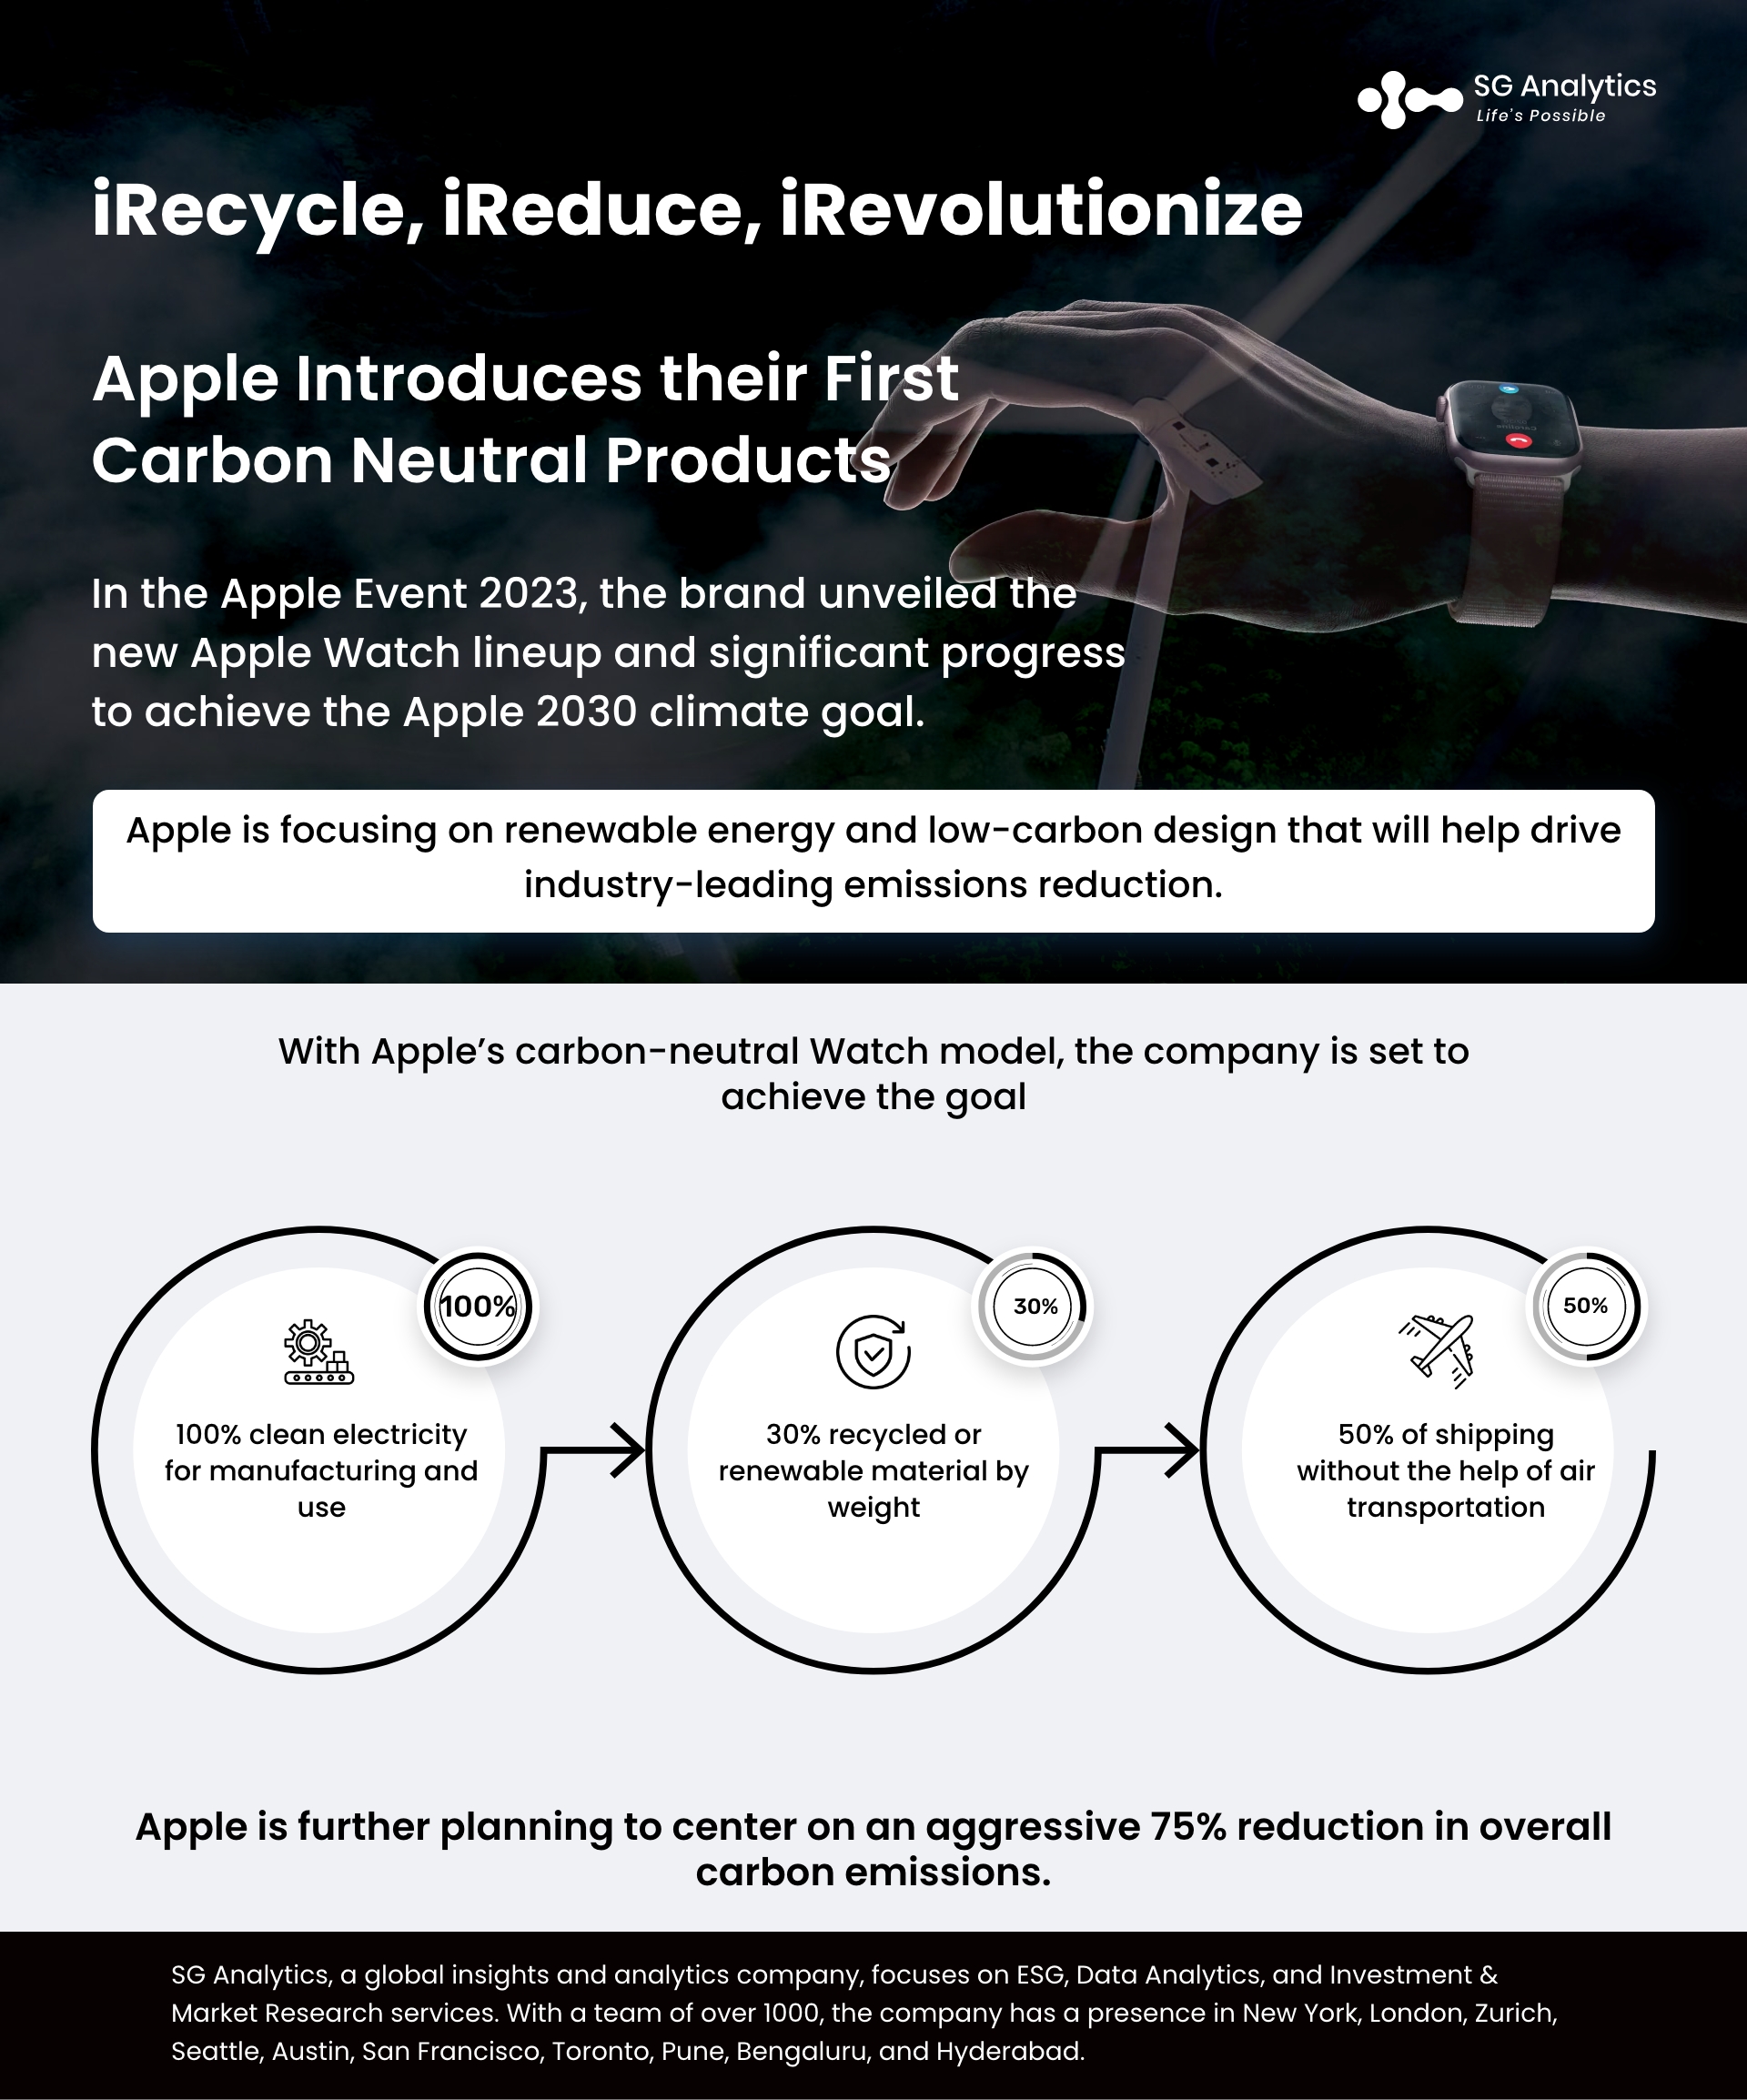 Apple Introduces their First Carbon Neutral Products